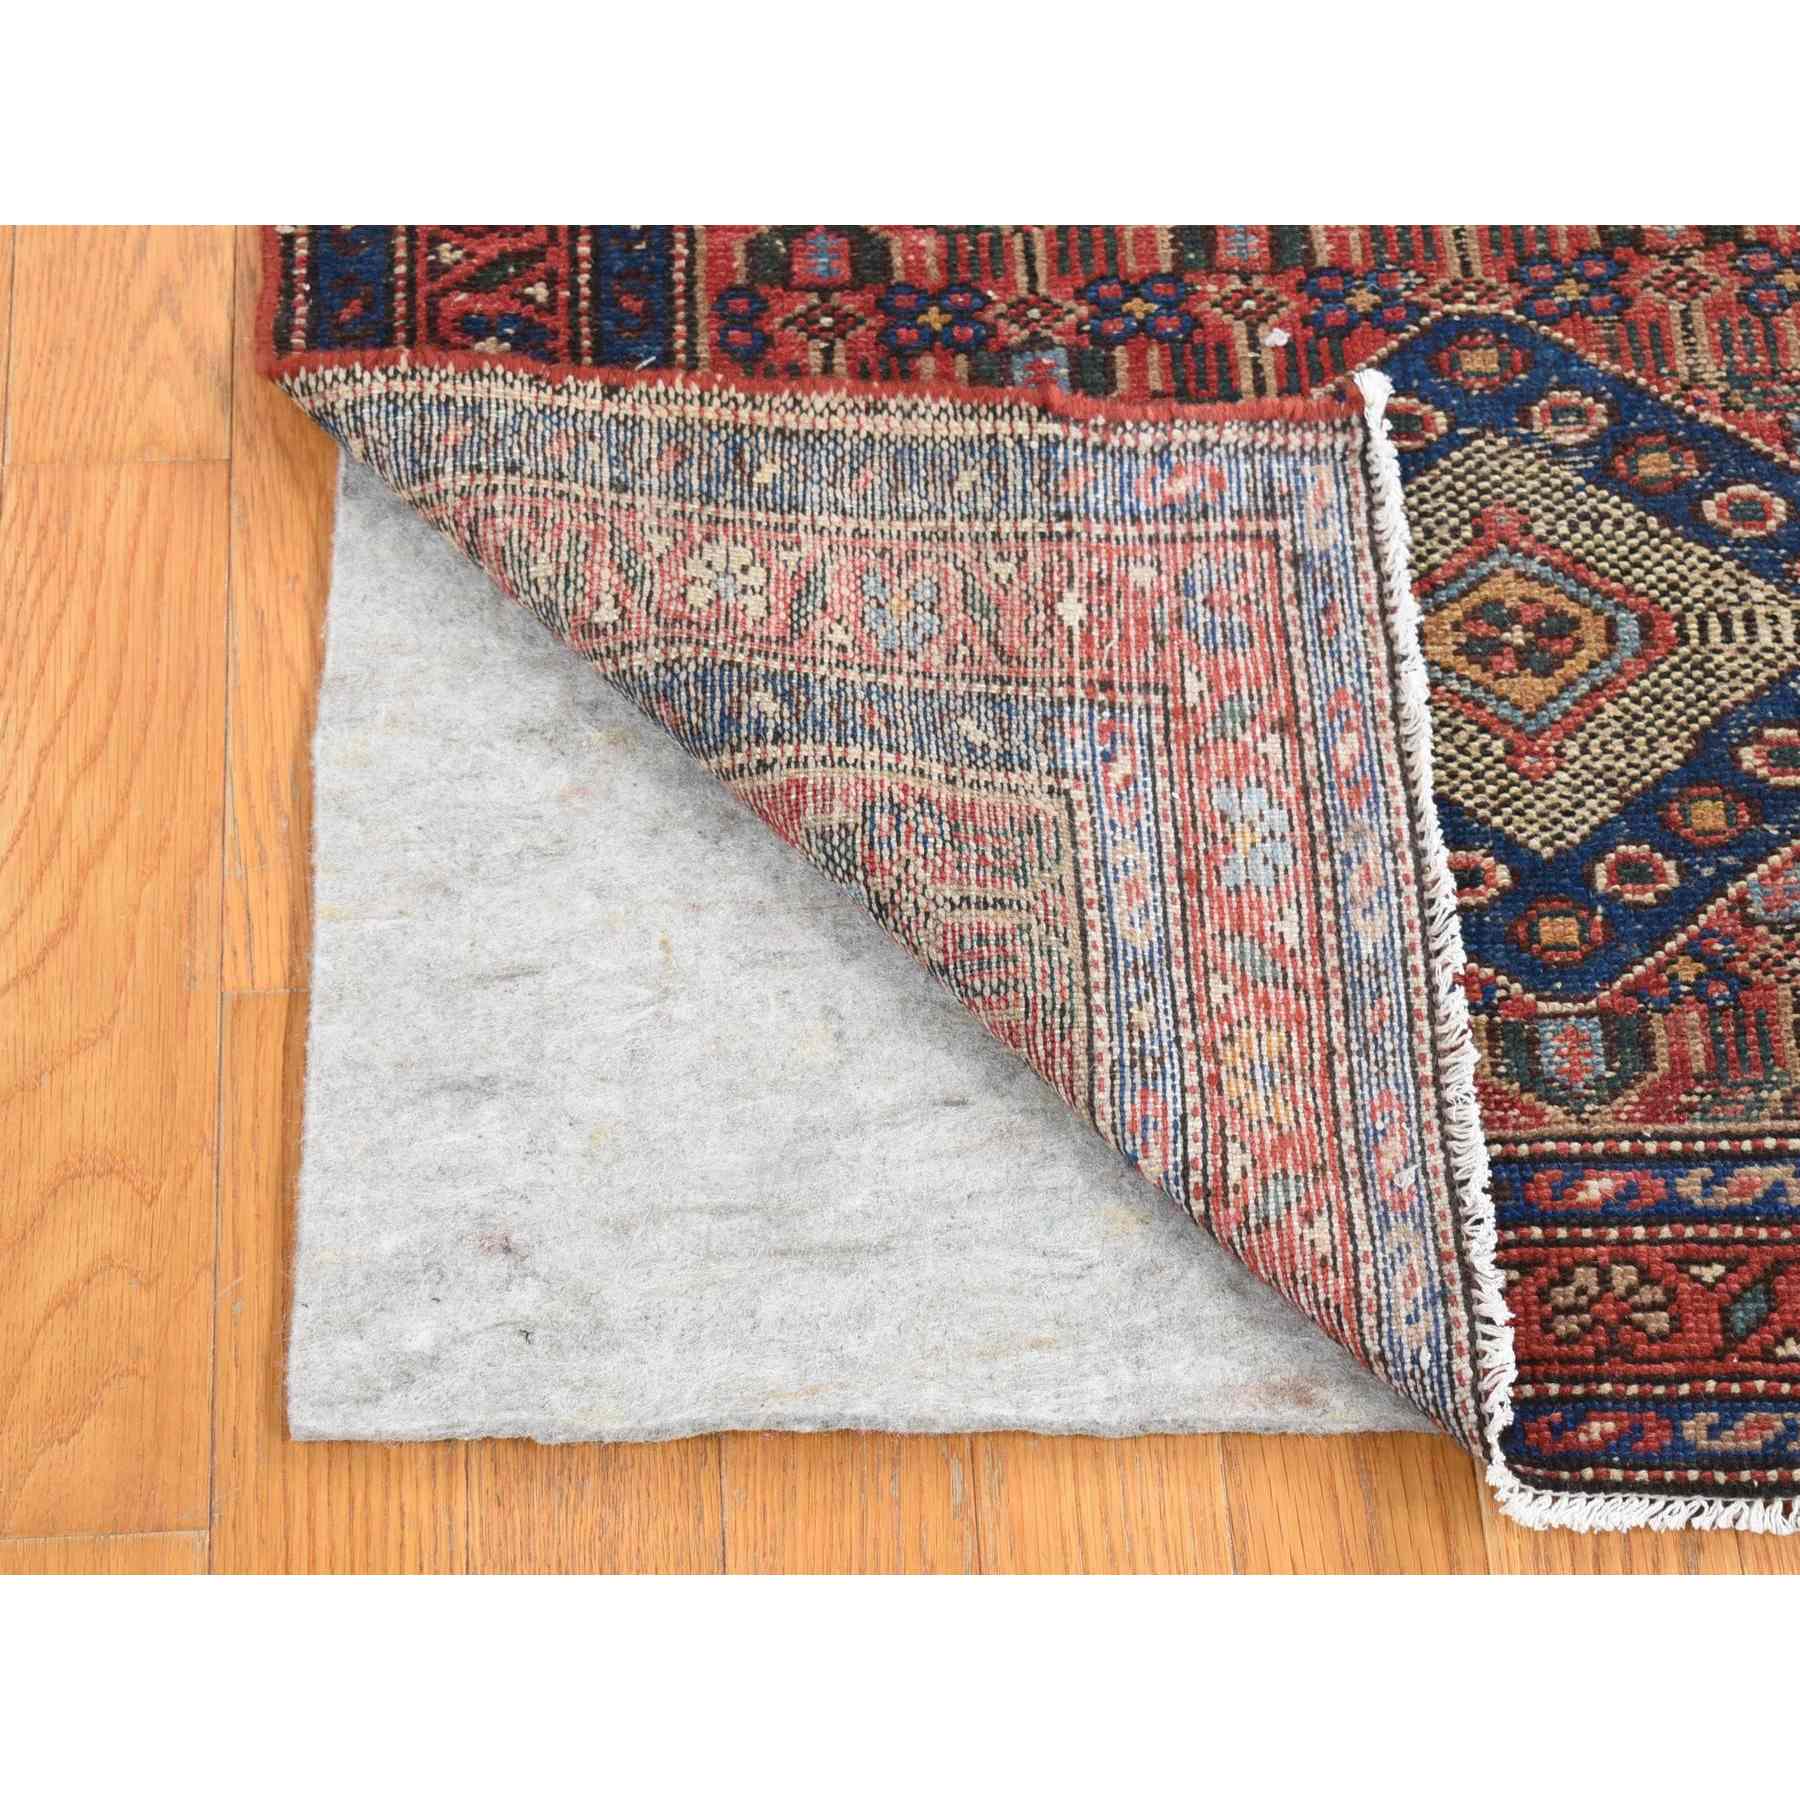 Antique-Hand-Knotted-Rug-402650